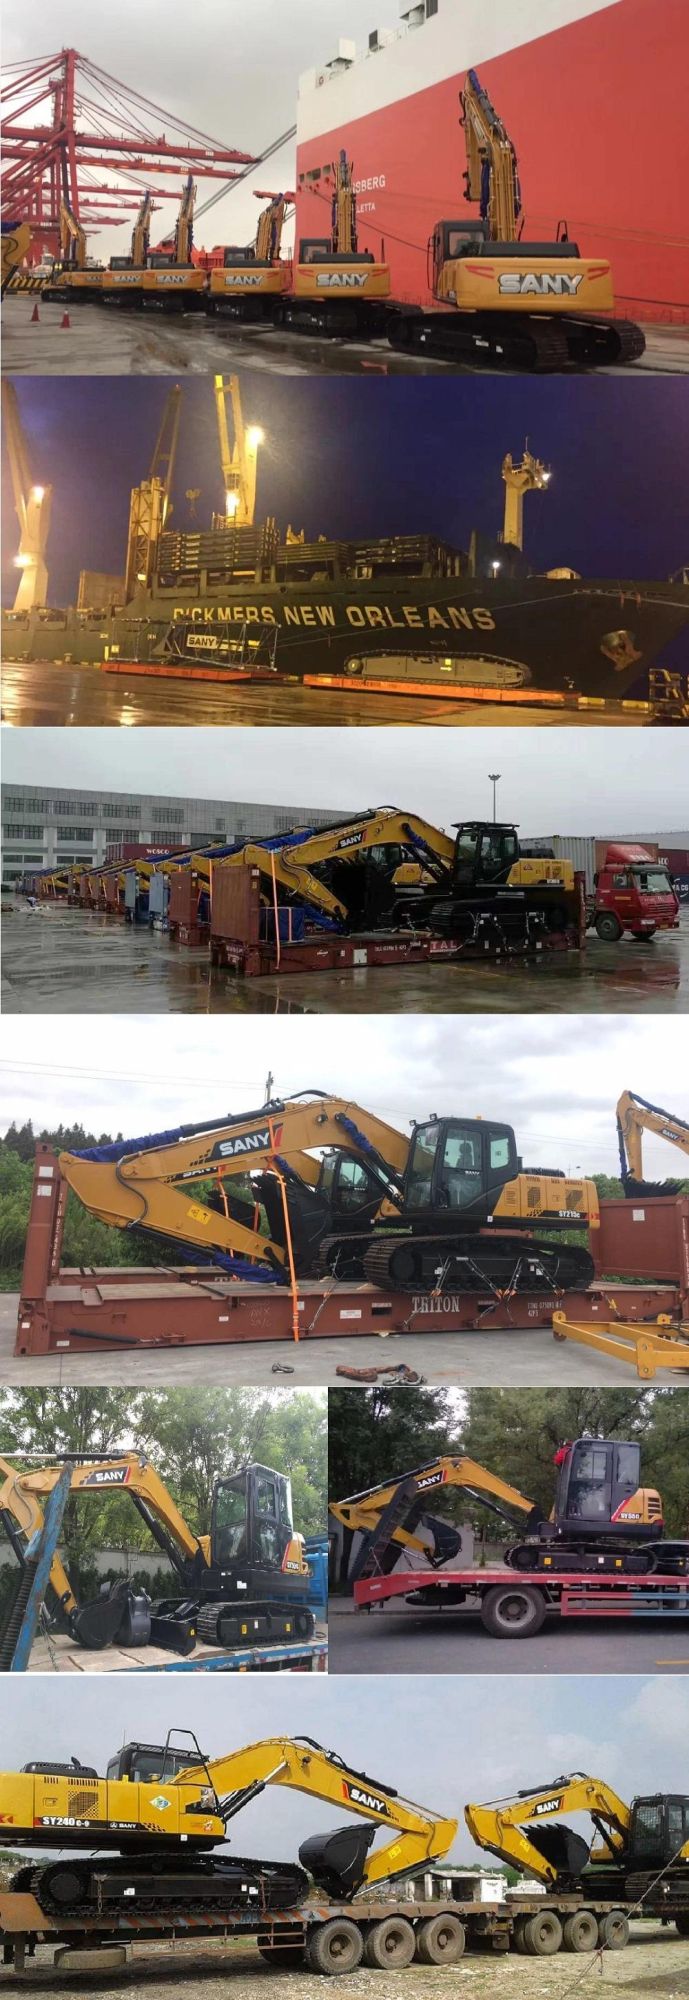 SANY SY195C 20Ton Hydraulic Excavator RC Digging Machine for Sale